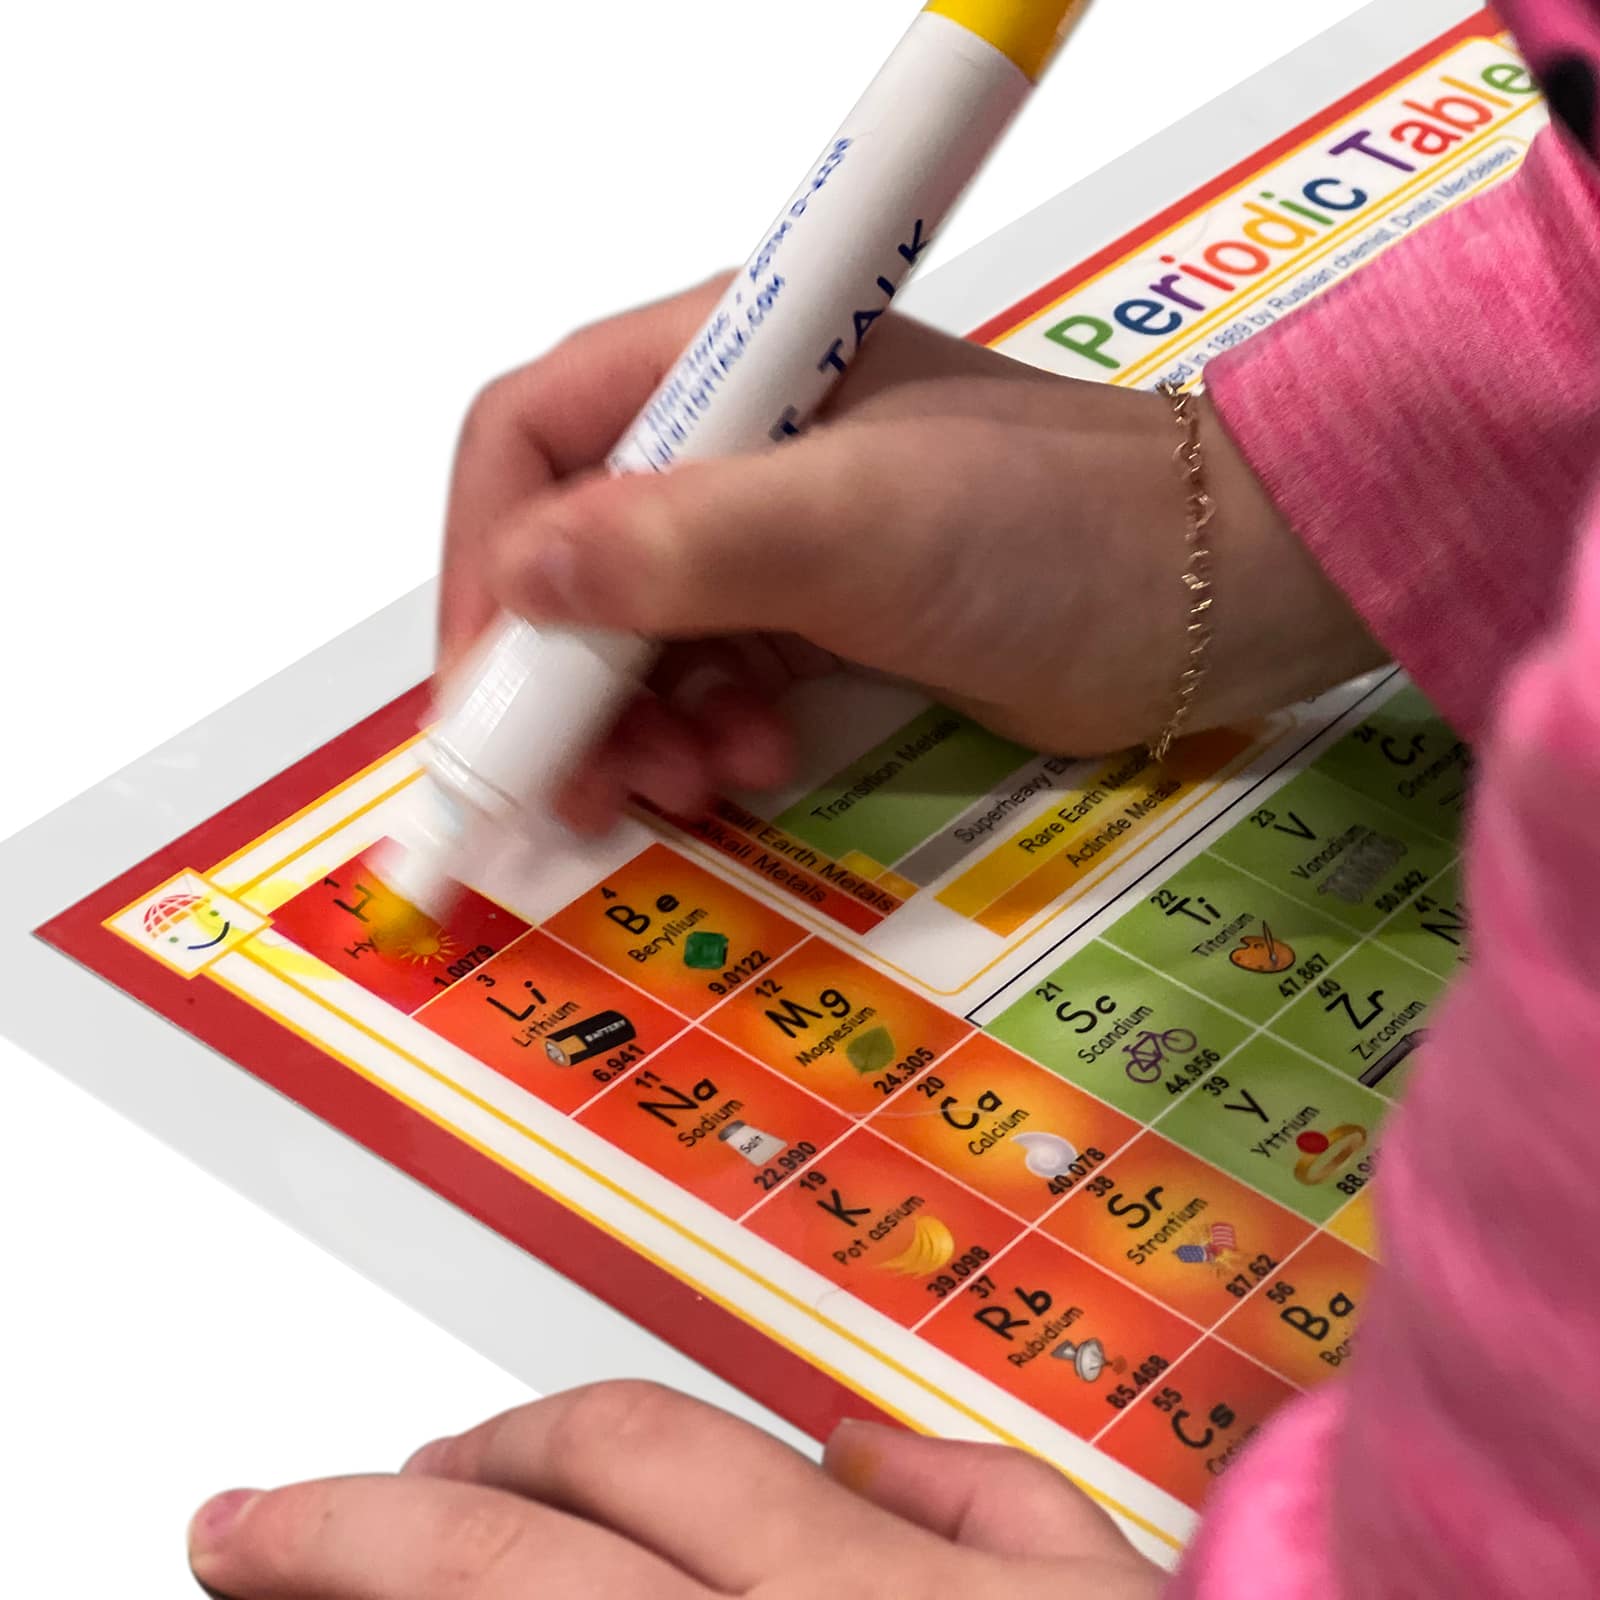 Tot Talk Periodic Table Placemat